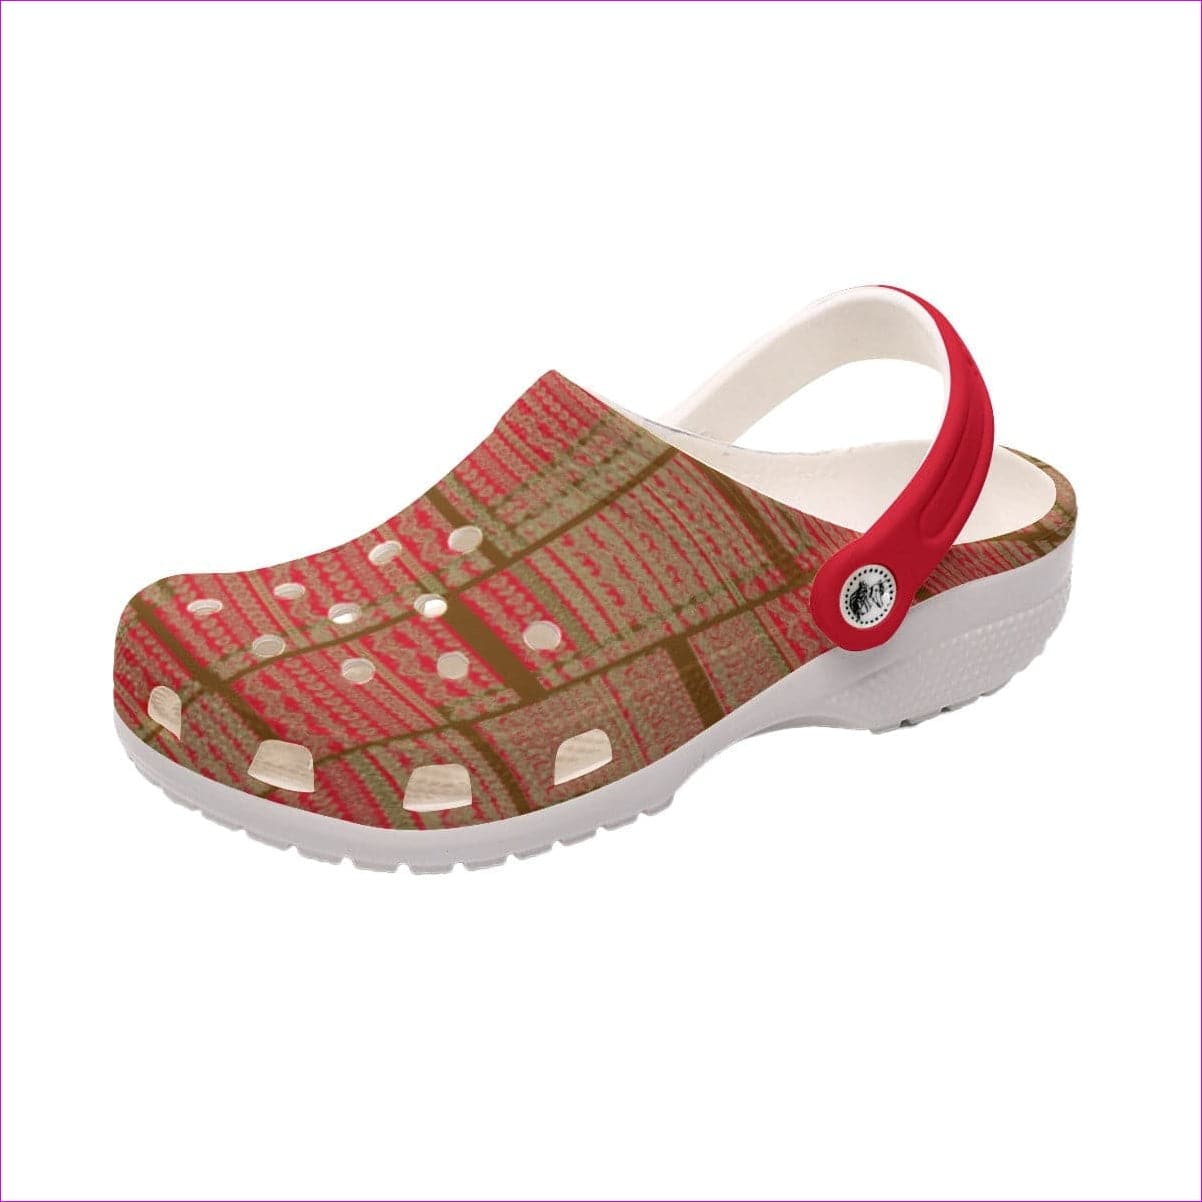 - Chained 2 Womens Classic Clogs - womens clogs at TFC&H Co.